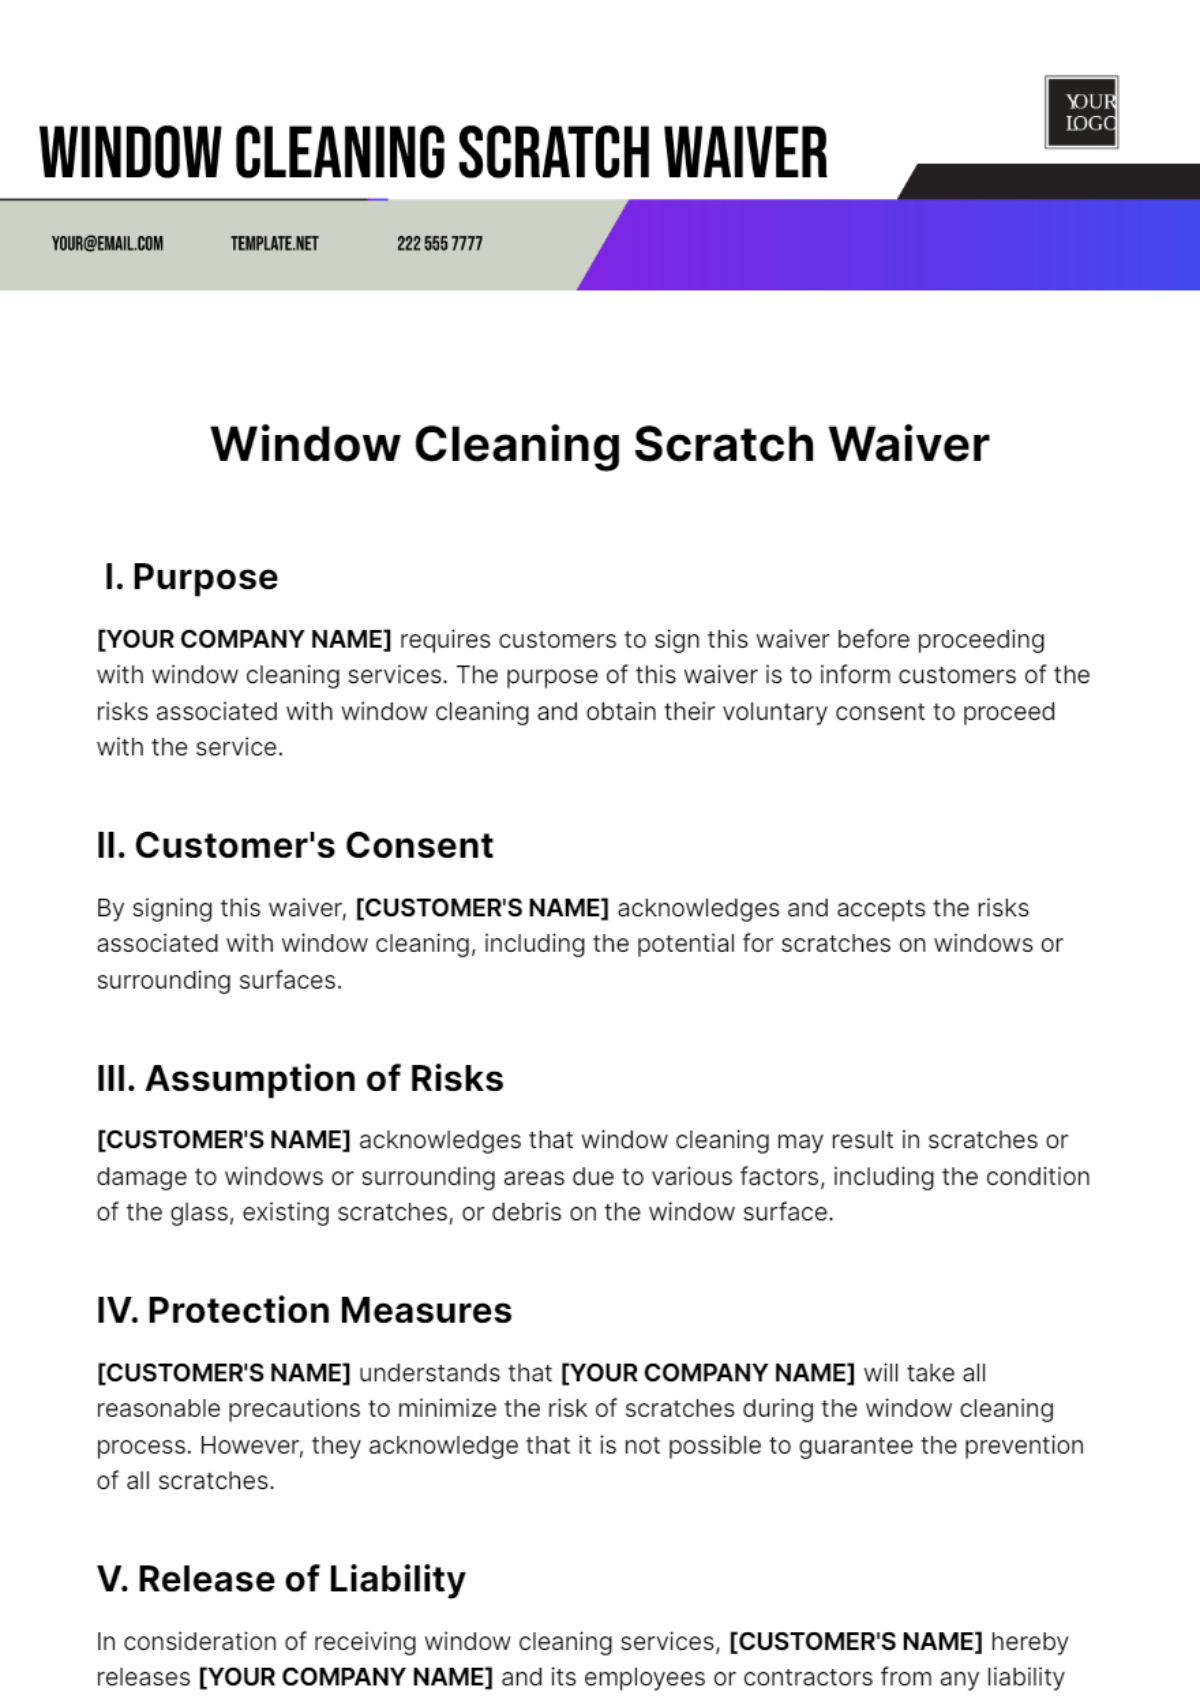 Free Window Cleaning Scratch Waiver Template